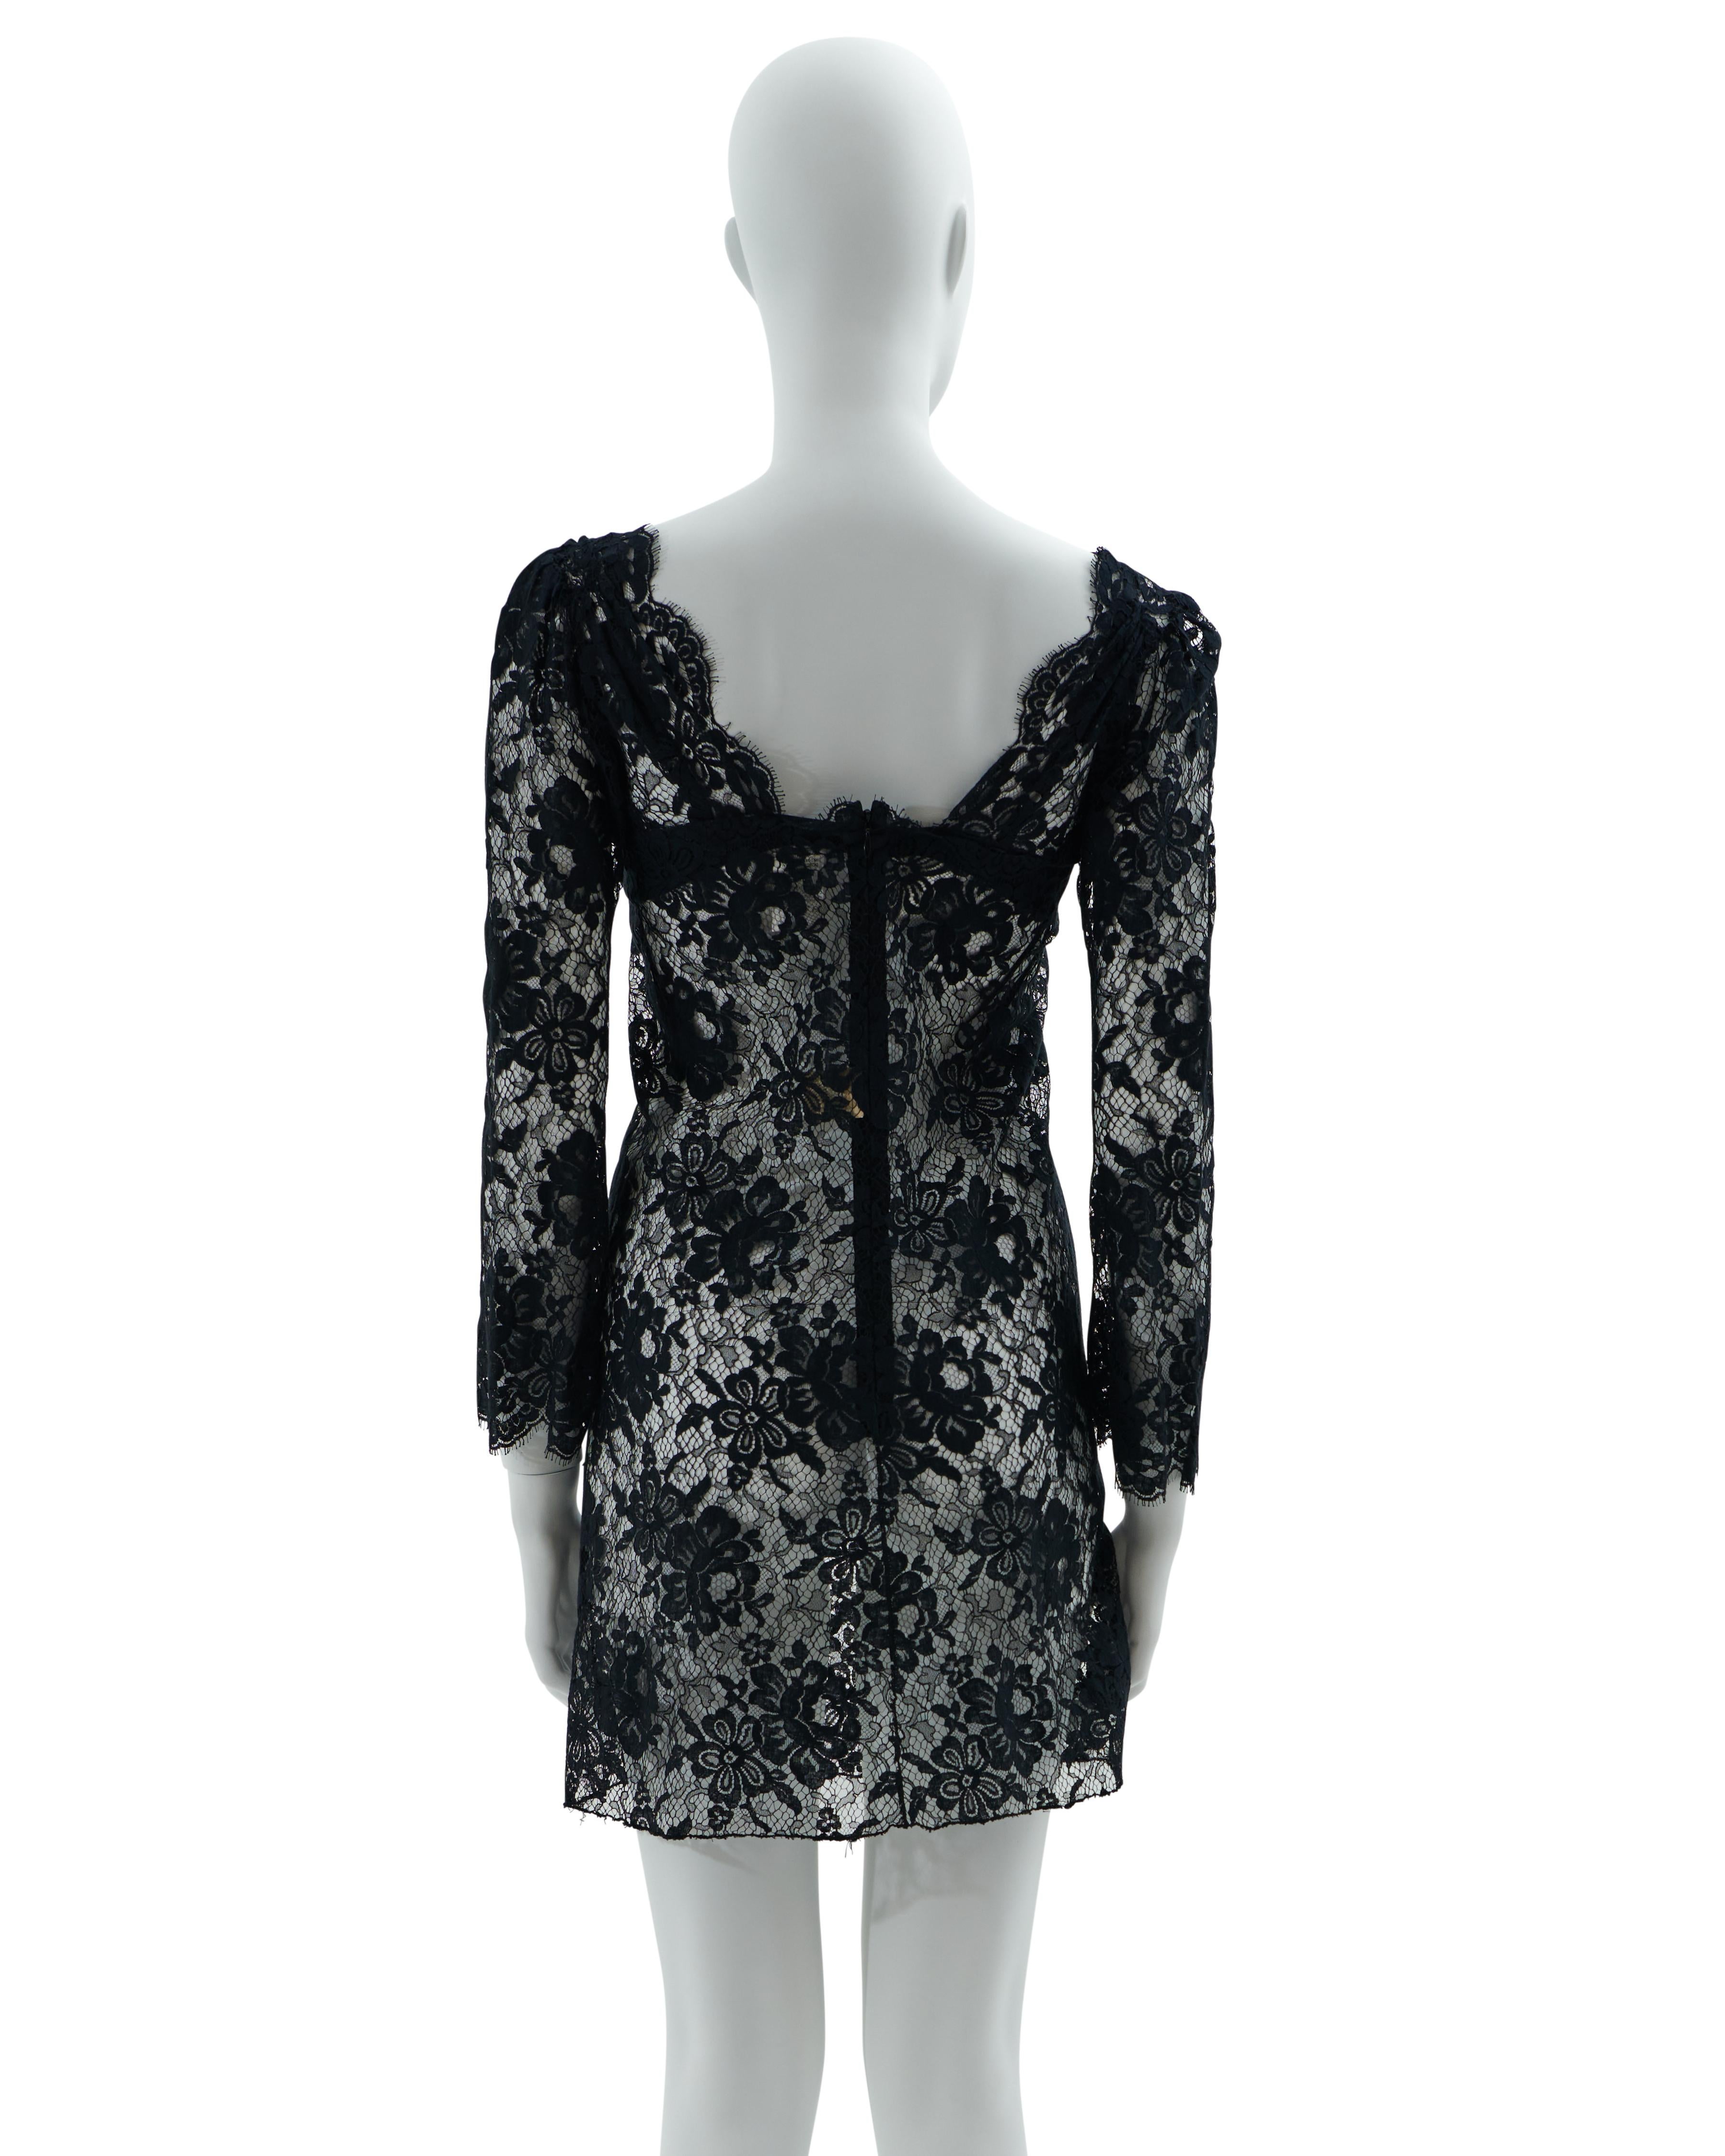 Dolce & Gabbana F/W 2001 Black lace slip dress with attached bra In Excellent Condition For Sale In Milano, IT